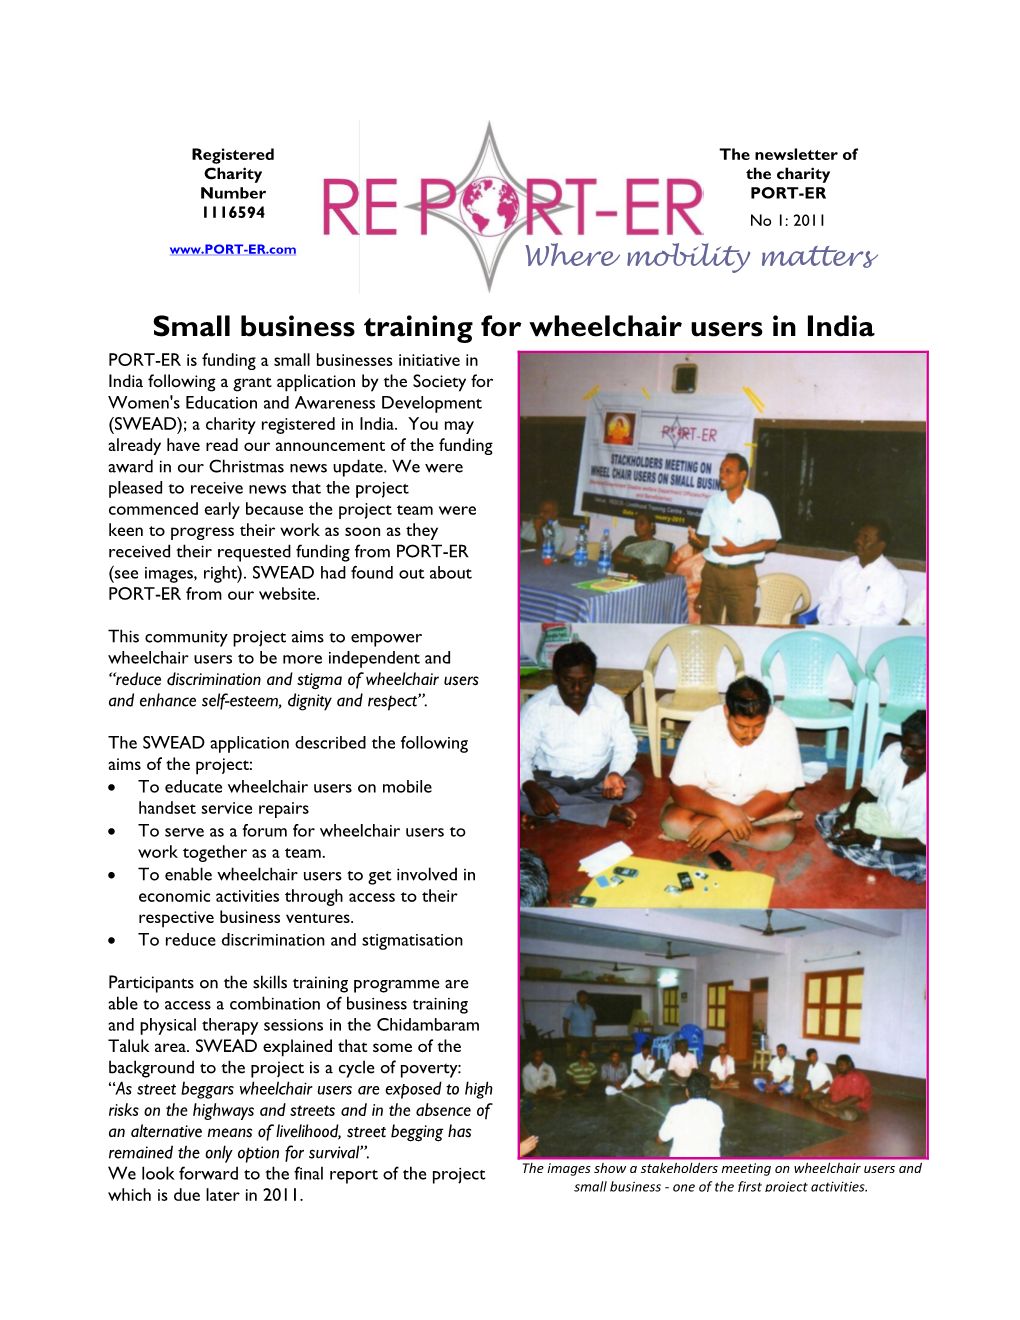 Small Business Training for Wheelchair Users in India PORT-ER Is Funding a Small Businesses Initiative in India Following a Grant Application by the Society For